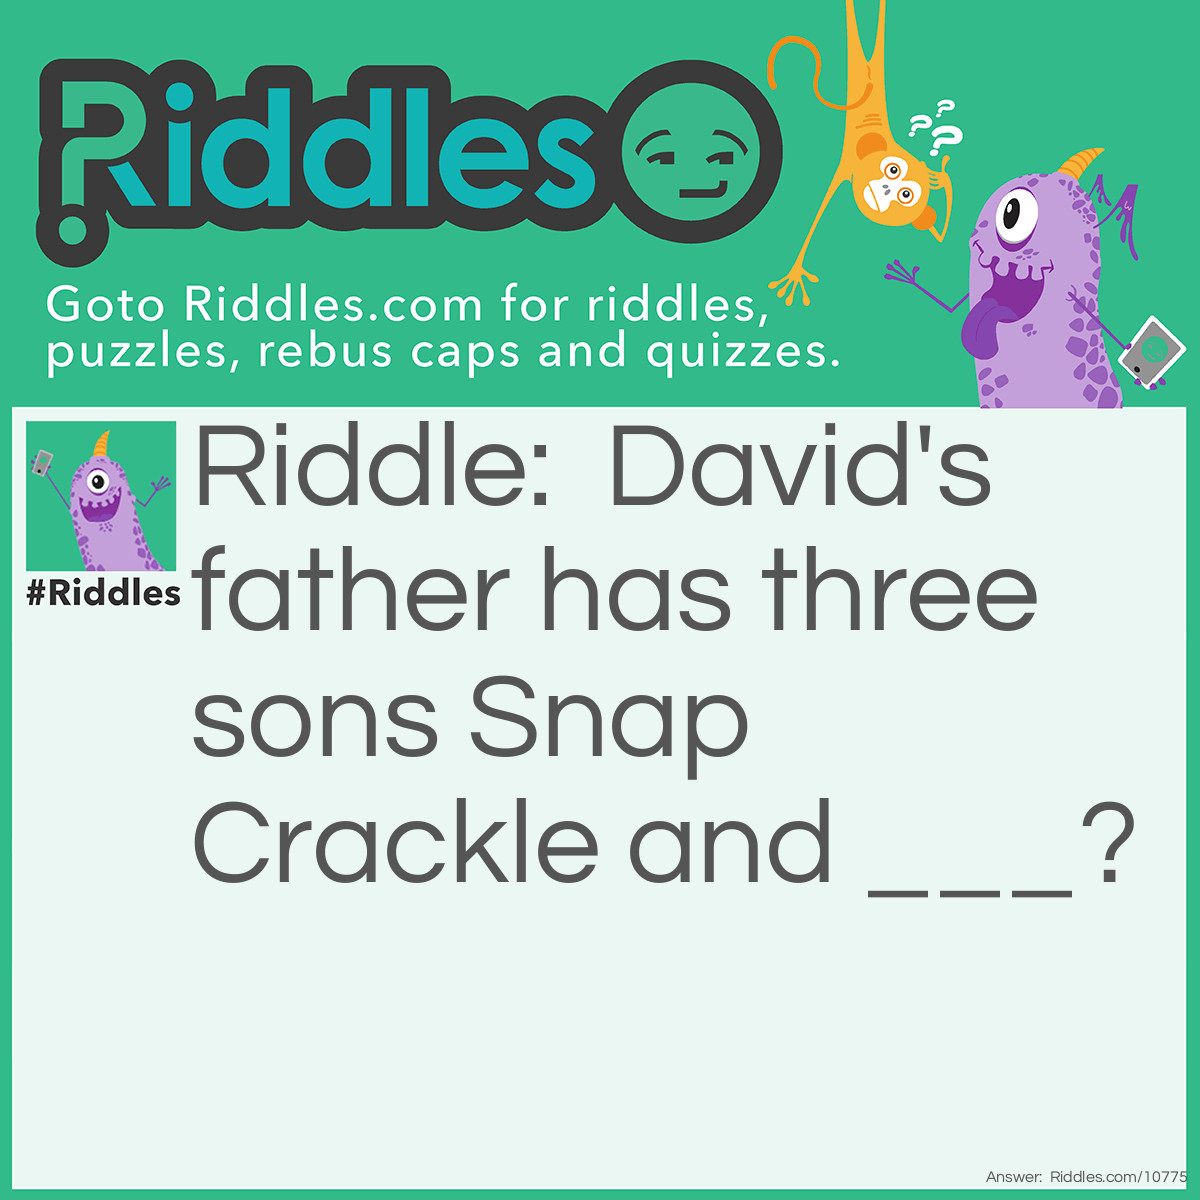 Riddle: David's father has three sons Snap Crackle and ___? Answer: David.